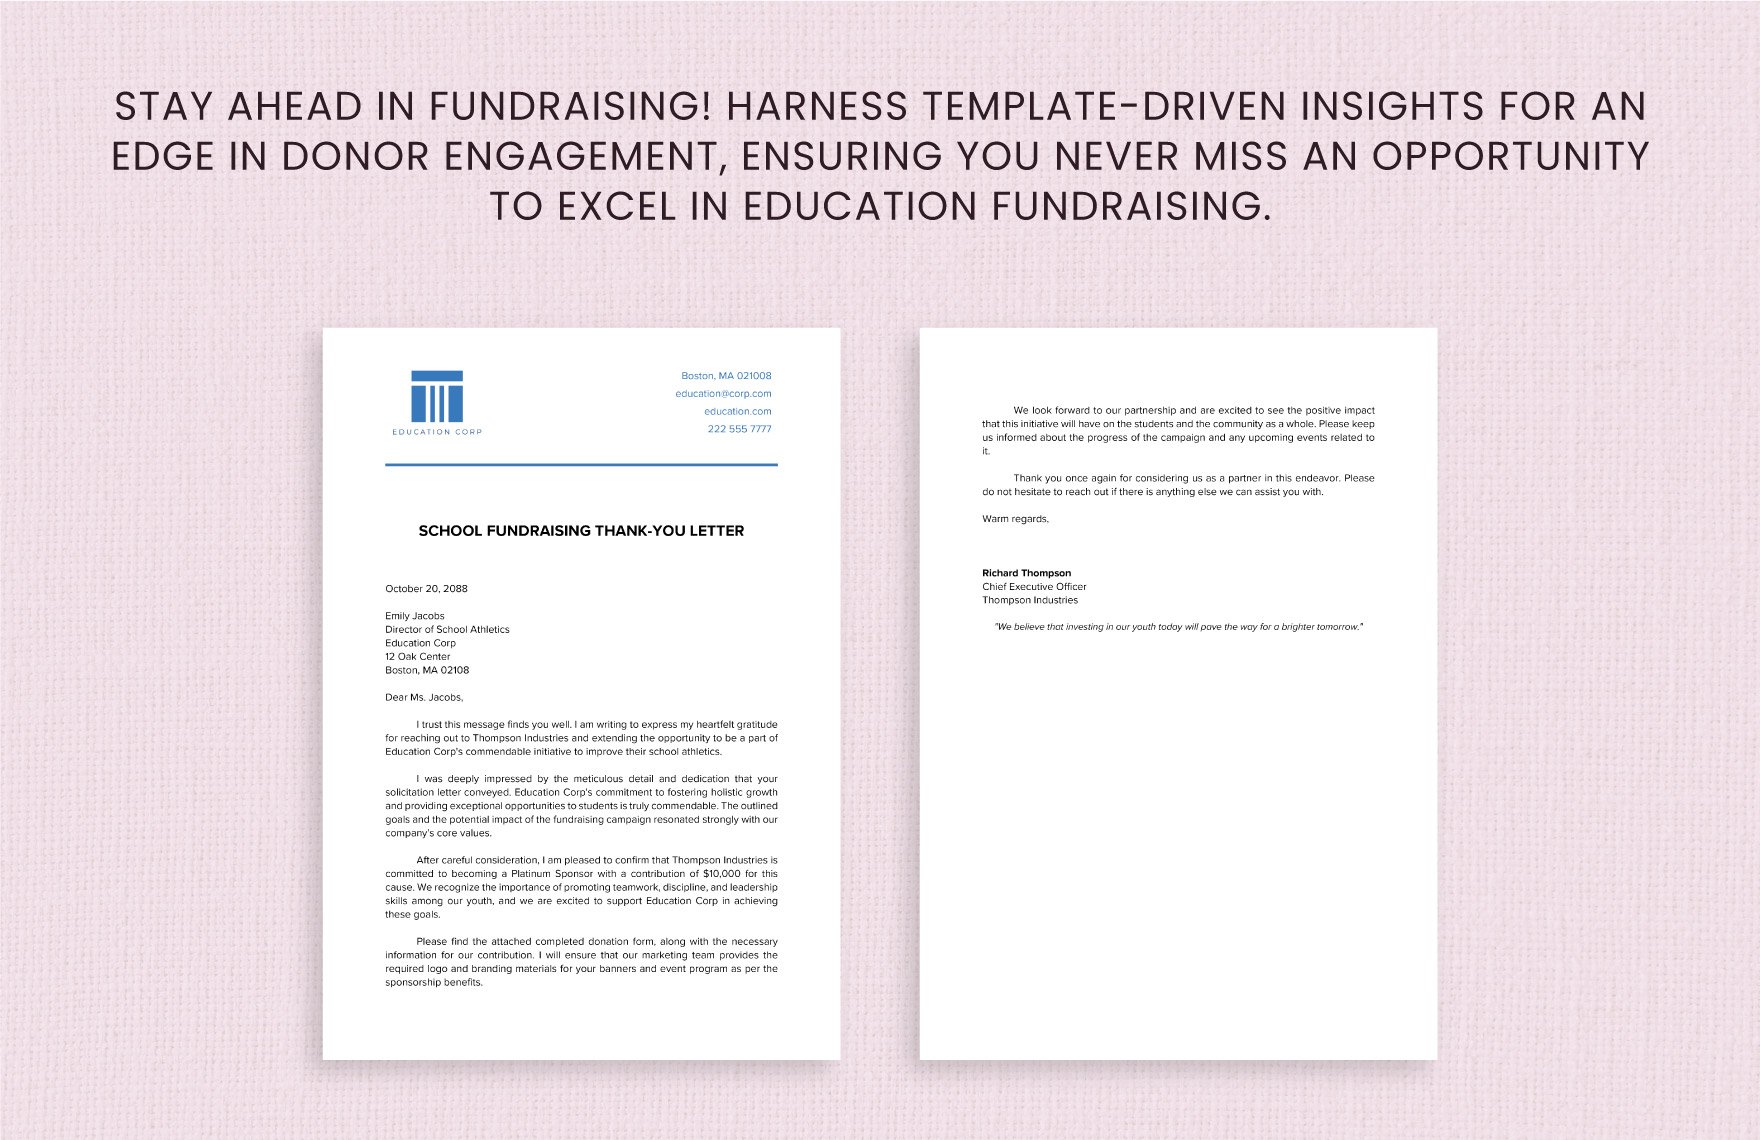 School Fundraising Thank-You Letter Template